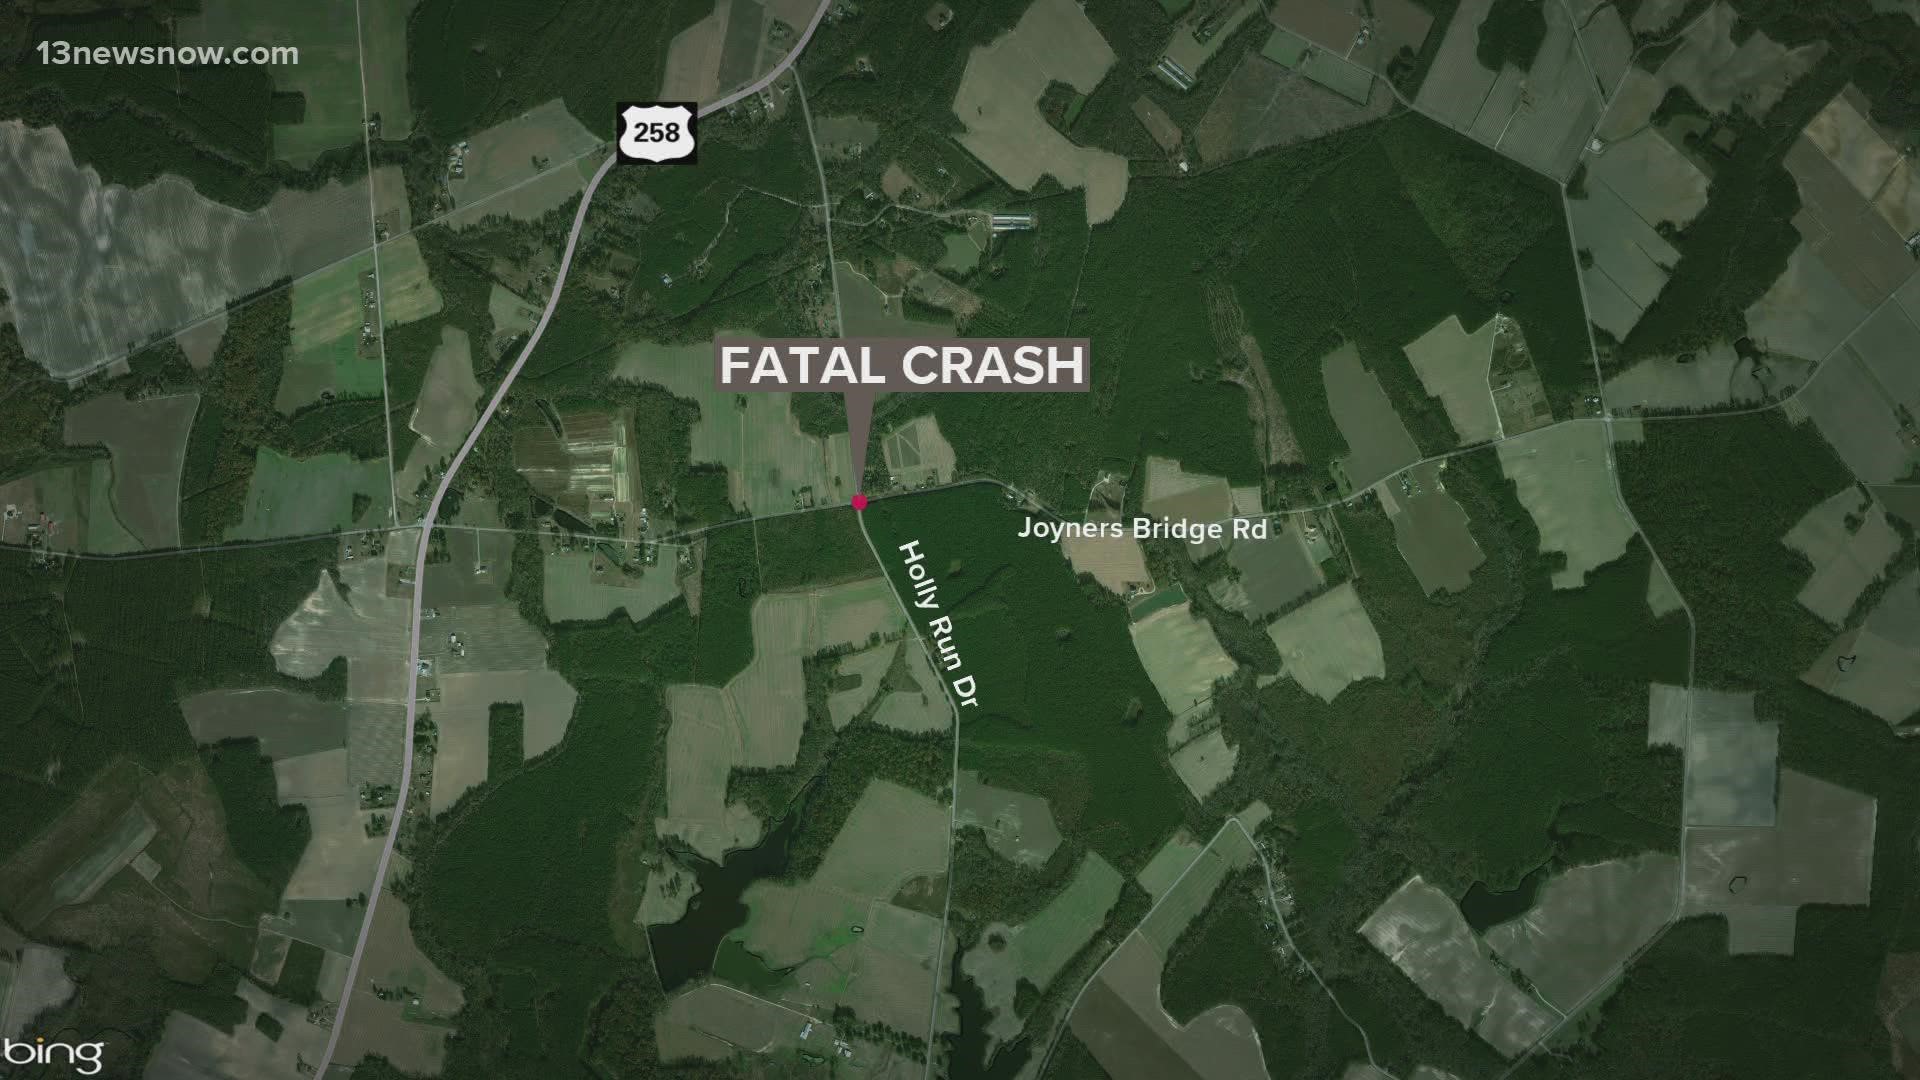 A man was killed in a car crash in Isle of Wight County Monday, according to Virginia State Police (VSP).